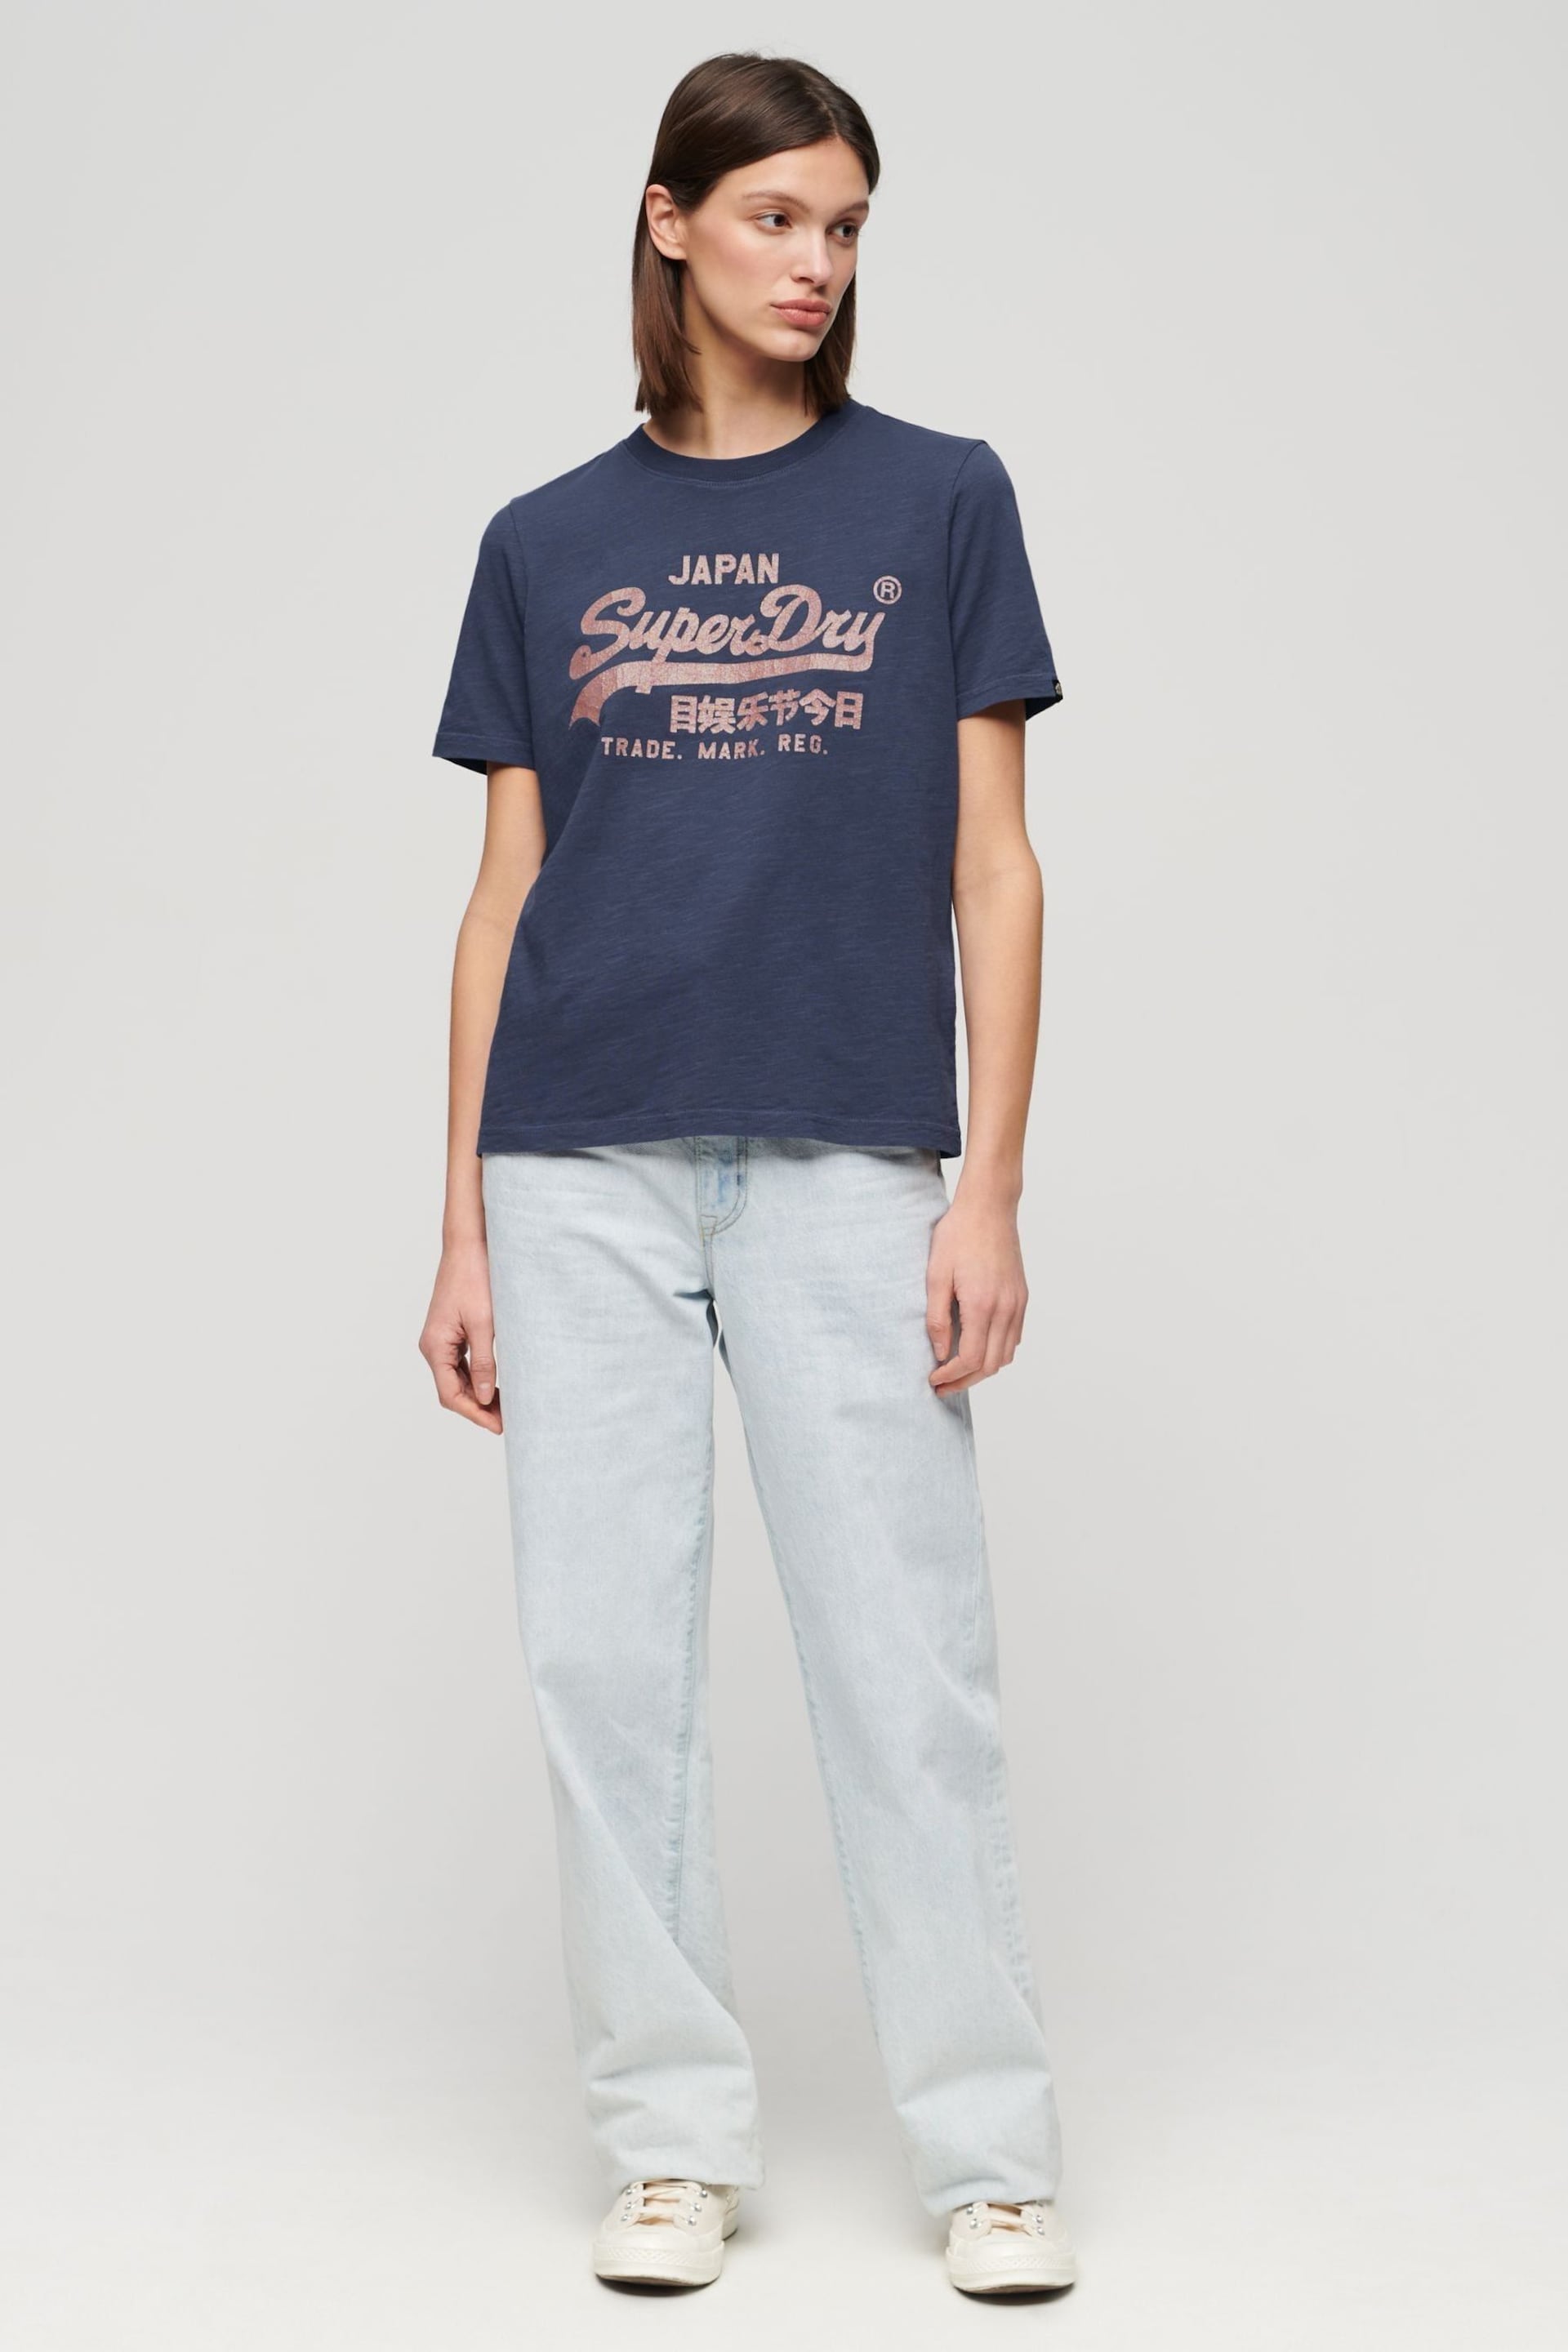 Superdry Blue Metallic Relaxed T-Shirt - Image 2 of 6